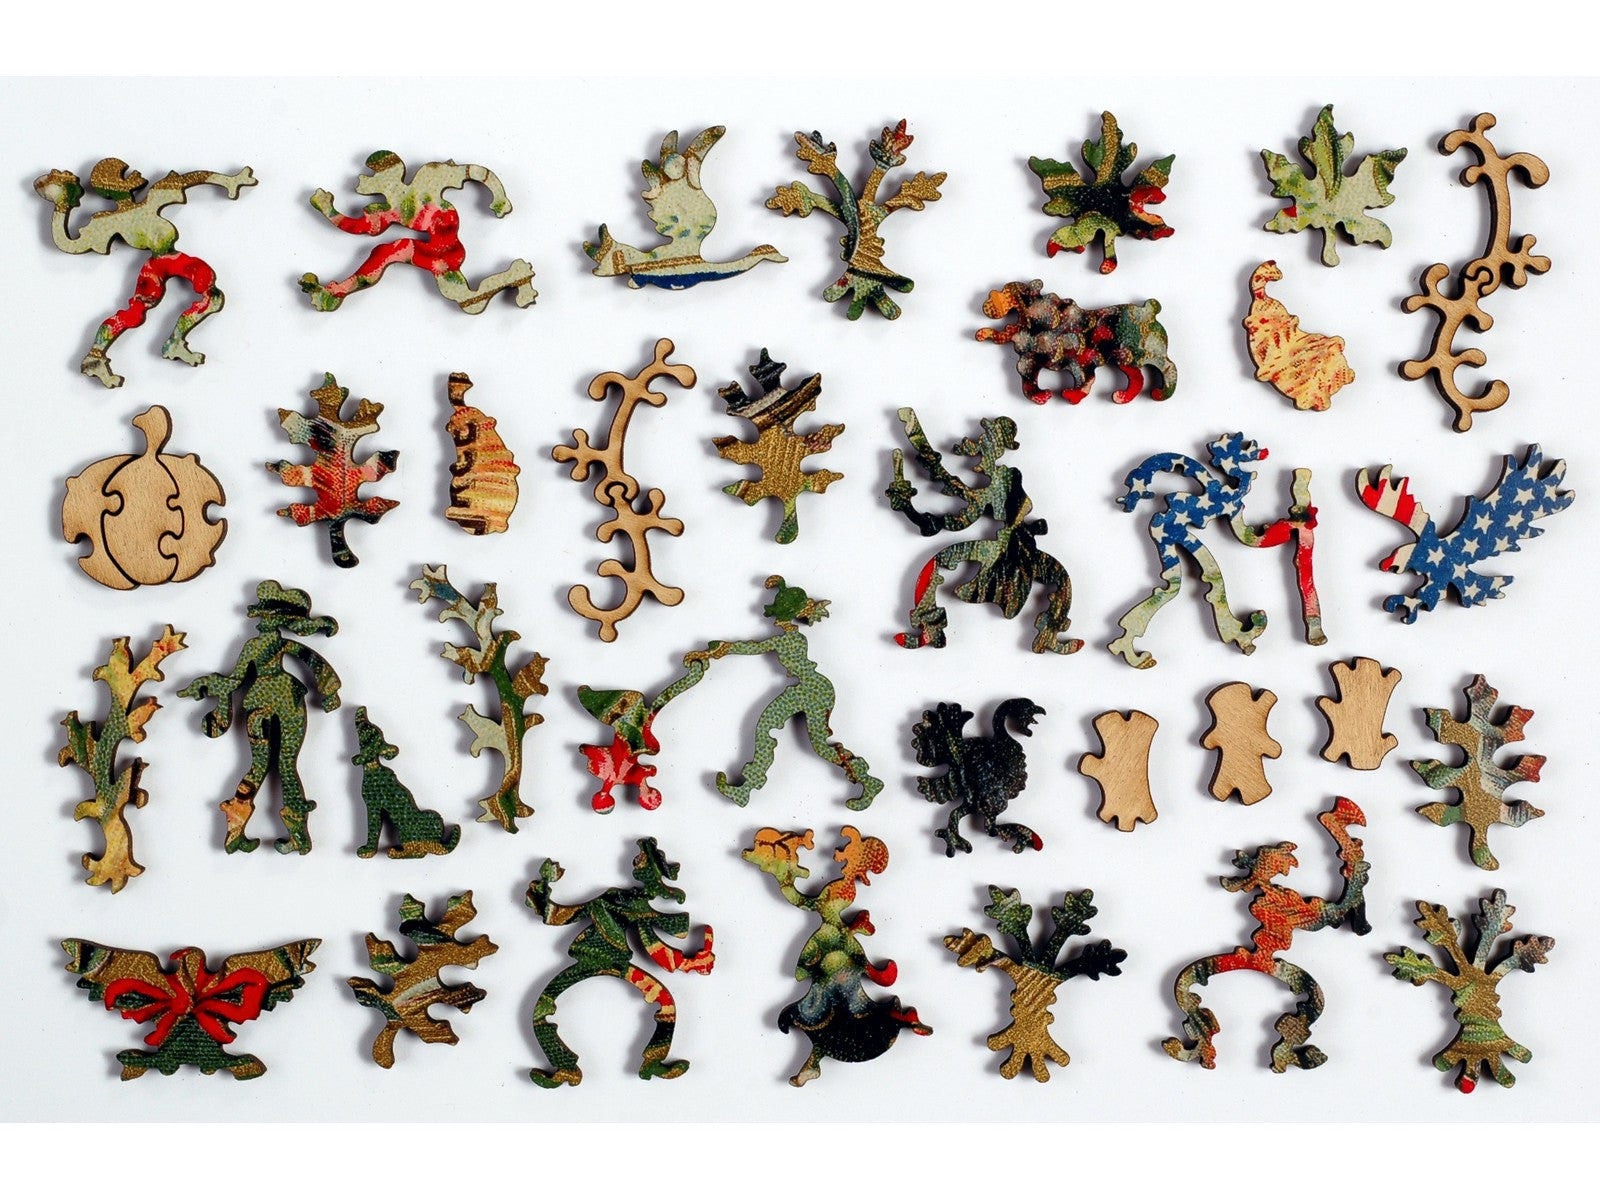 The whimsy pieces that can be found in the puzzle, Patriotic Turkey.